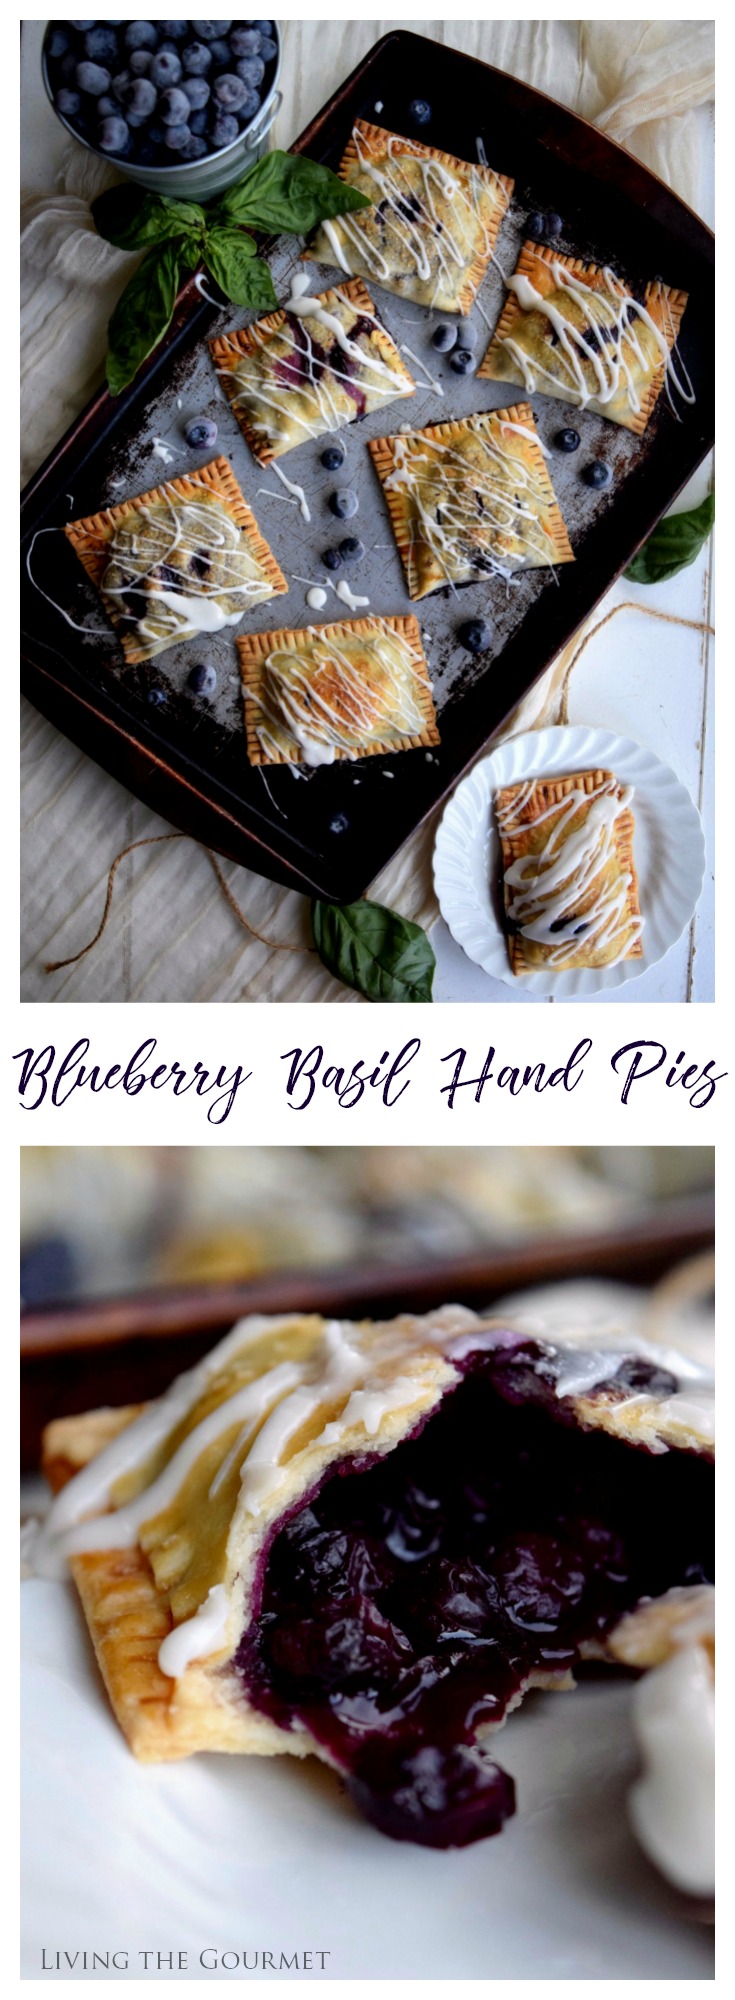 Living the Gourmet: Baked into a delicate, buttery crust, these Blueberry Basil Hand Pies are bursting with the flavors of the summer.